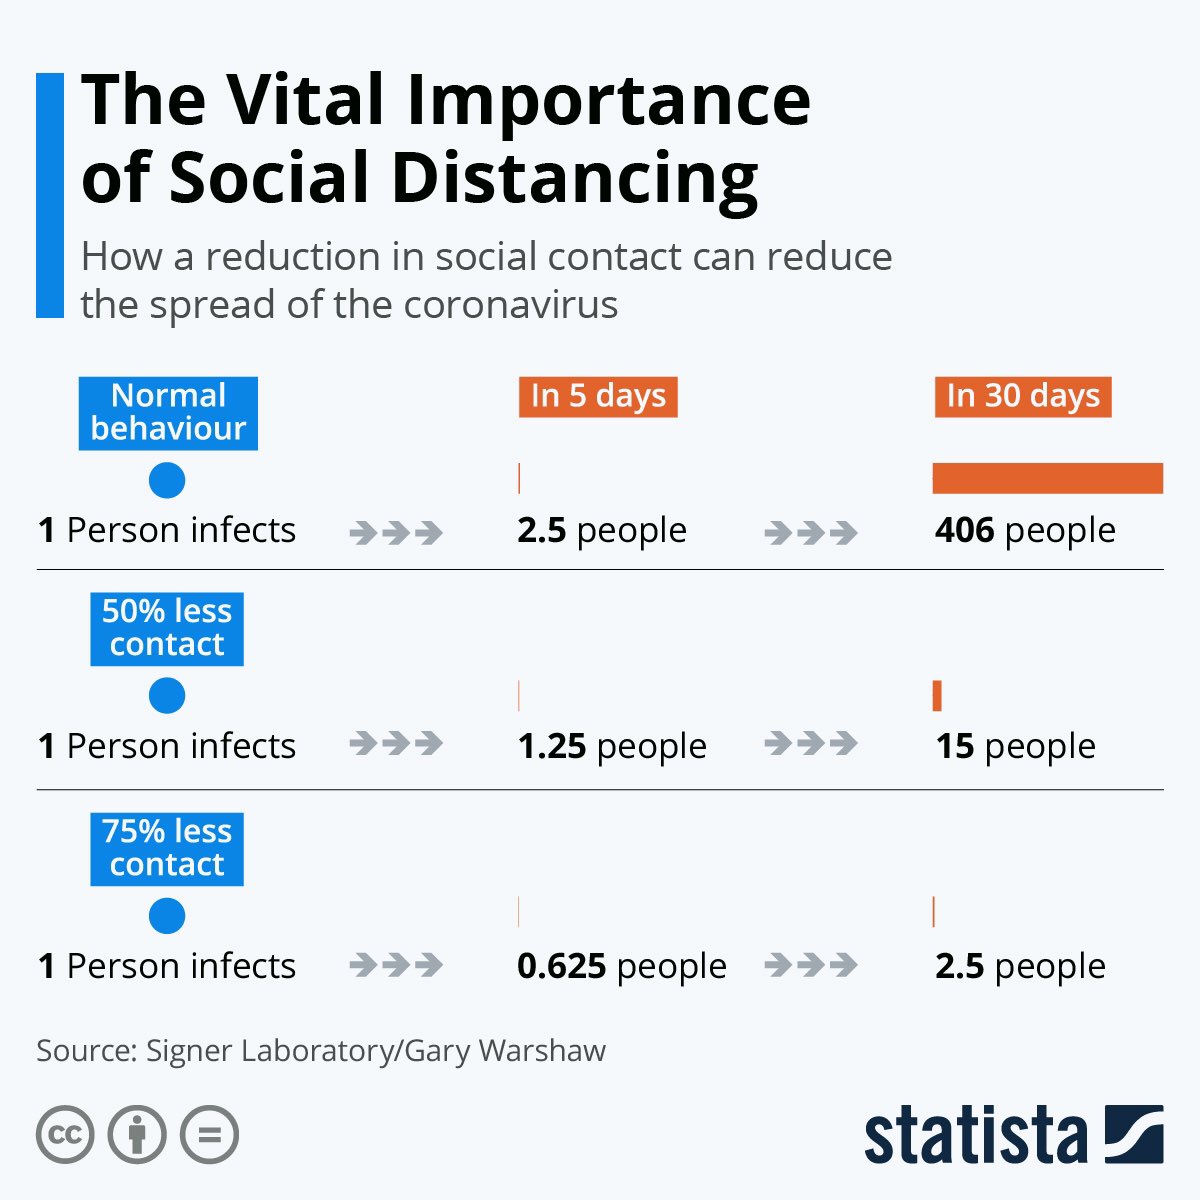 And here in simple numbers why social distancing is so effective